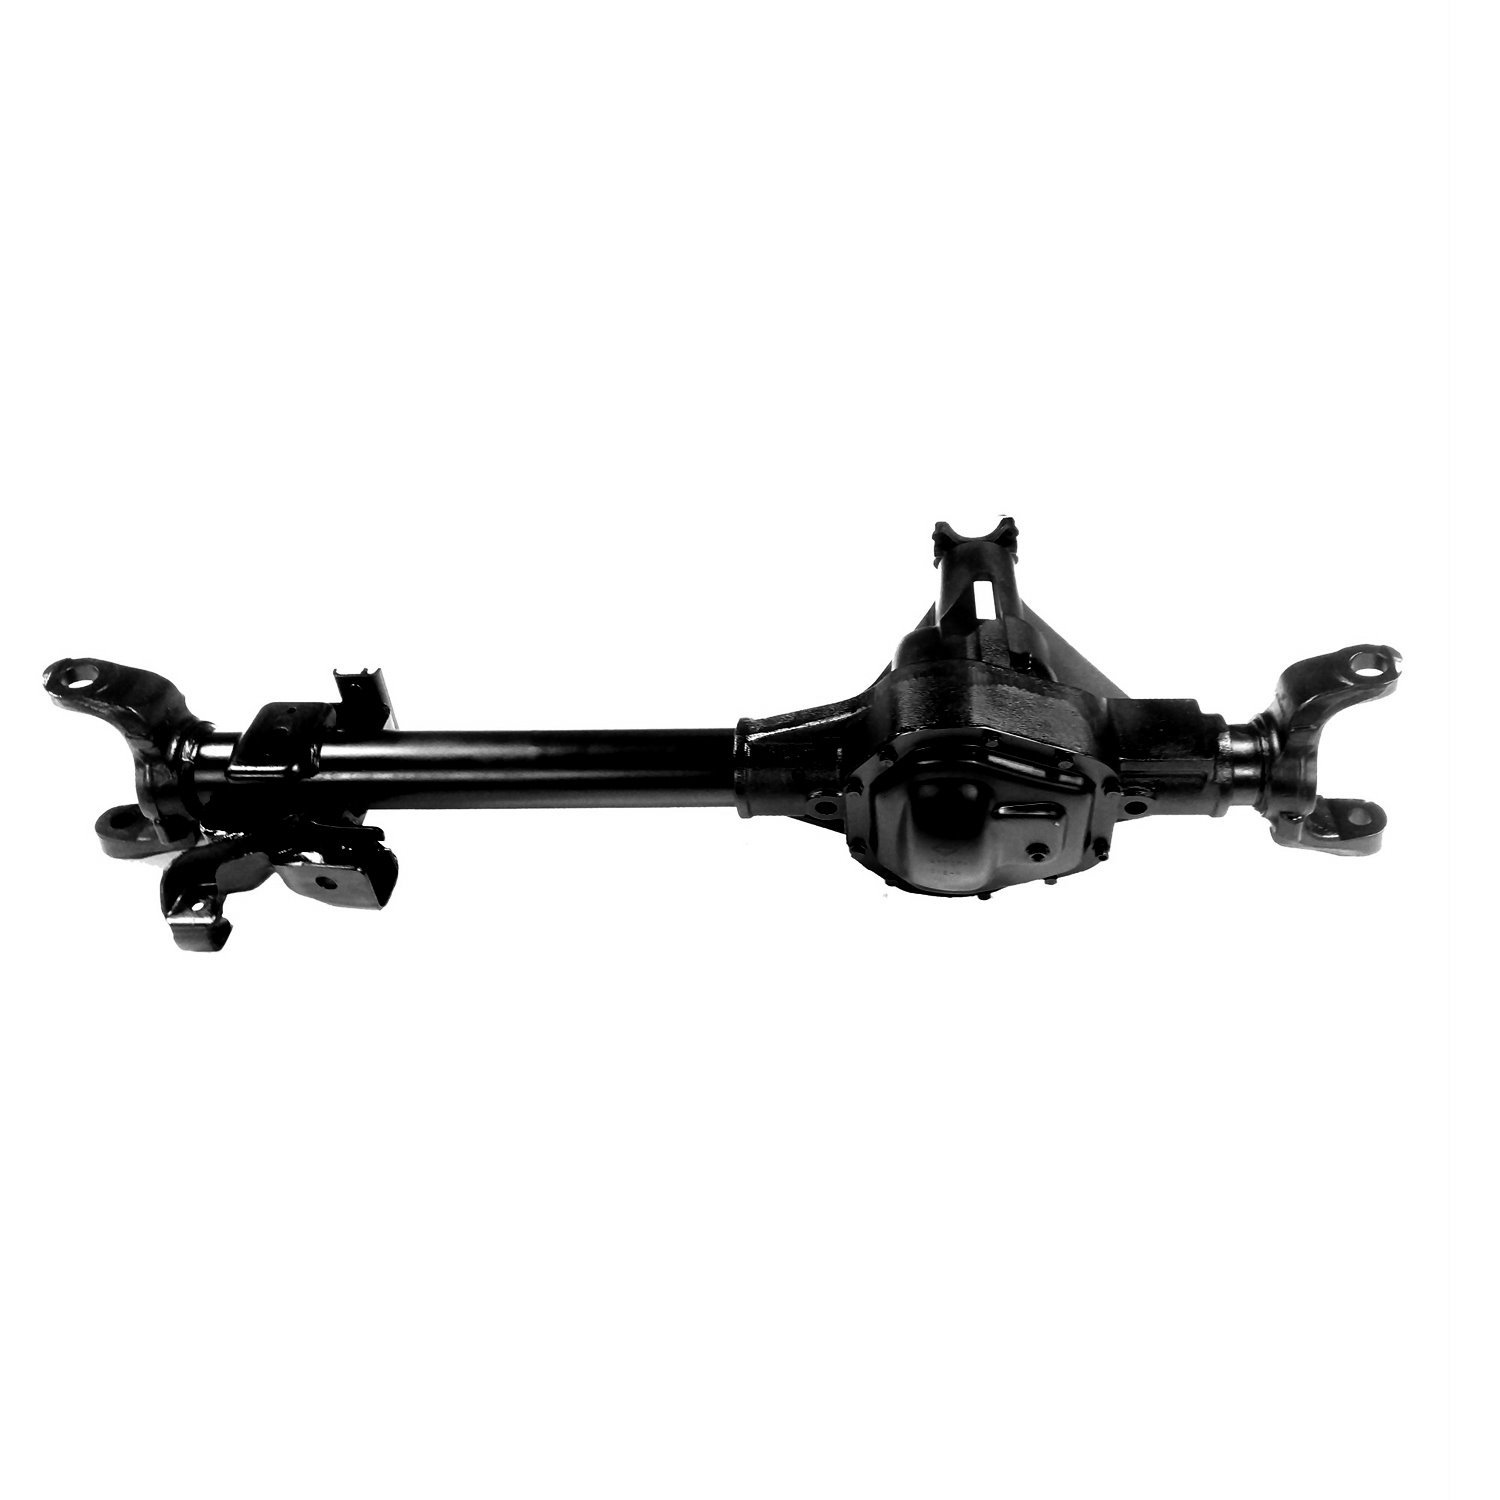 Remanufactured Complete Axle Assembly for Dana 60 02-04 Ford F250 & F350 4.30, SRW